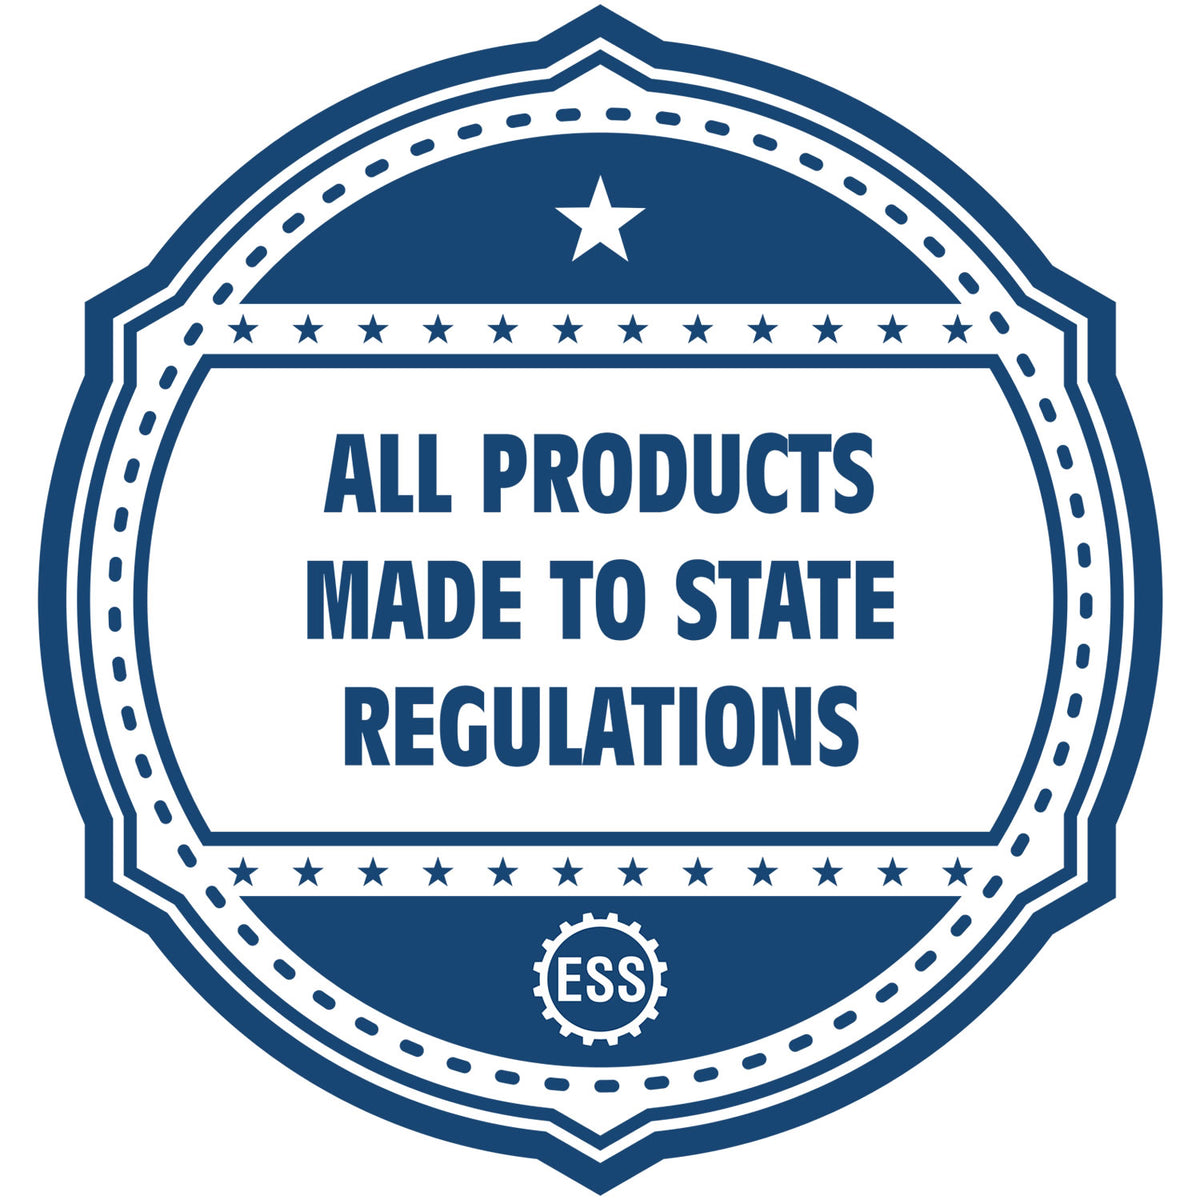 An icon or badge element for the Slim Pre-Inked Ohio Landscape Architect Seal Stamp showing that this product is made in compliance with state regulations.